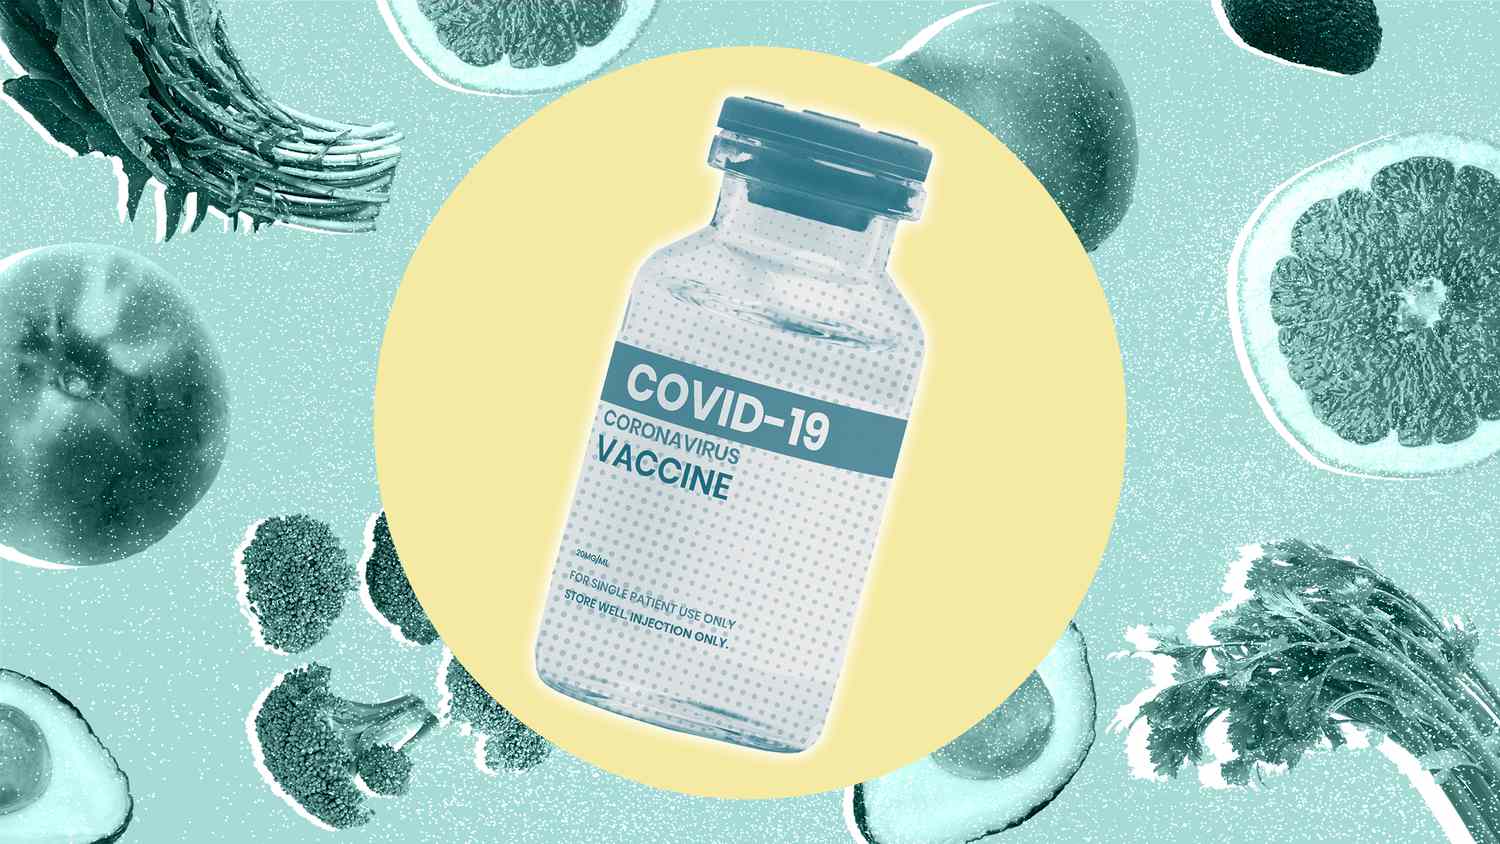 image?url=https%3A%2F%2Fstatic.onecms.io%2Fwp content%2Fuploads%2Fsites%2F44%2F2021%2F03%2F25%2Fwhat to eat before and after getting the covid vaccine v3